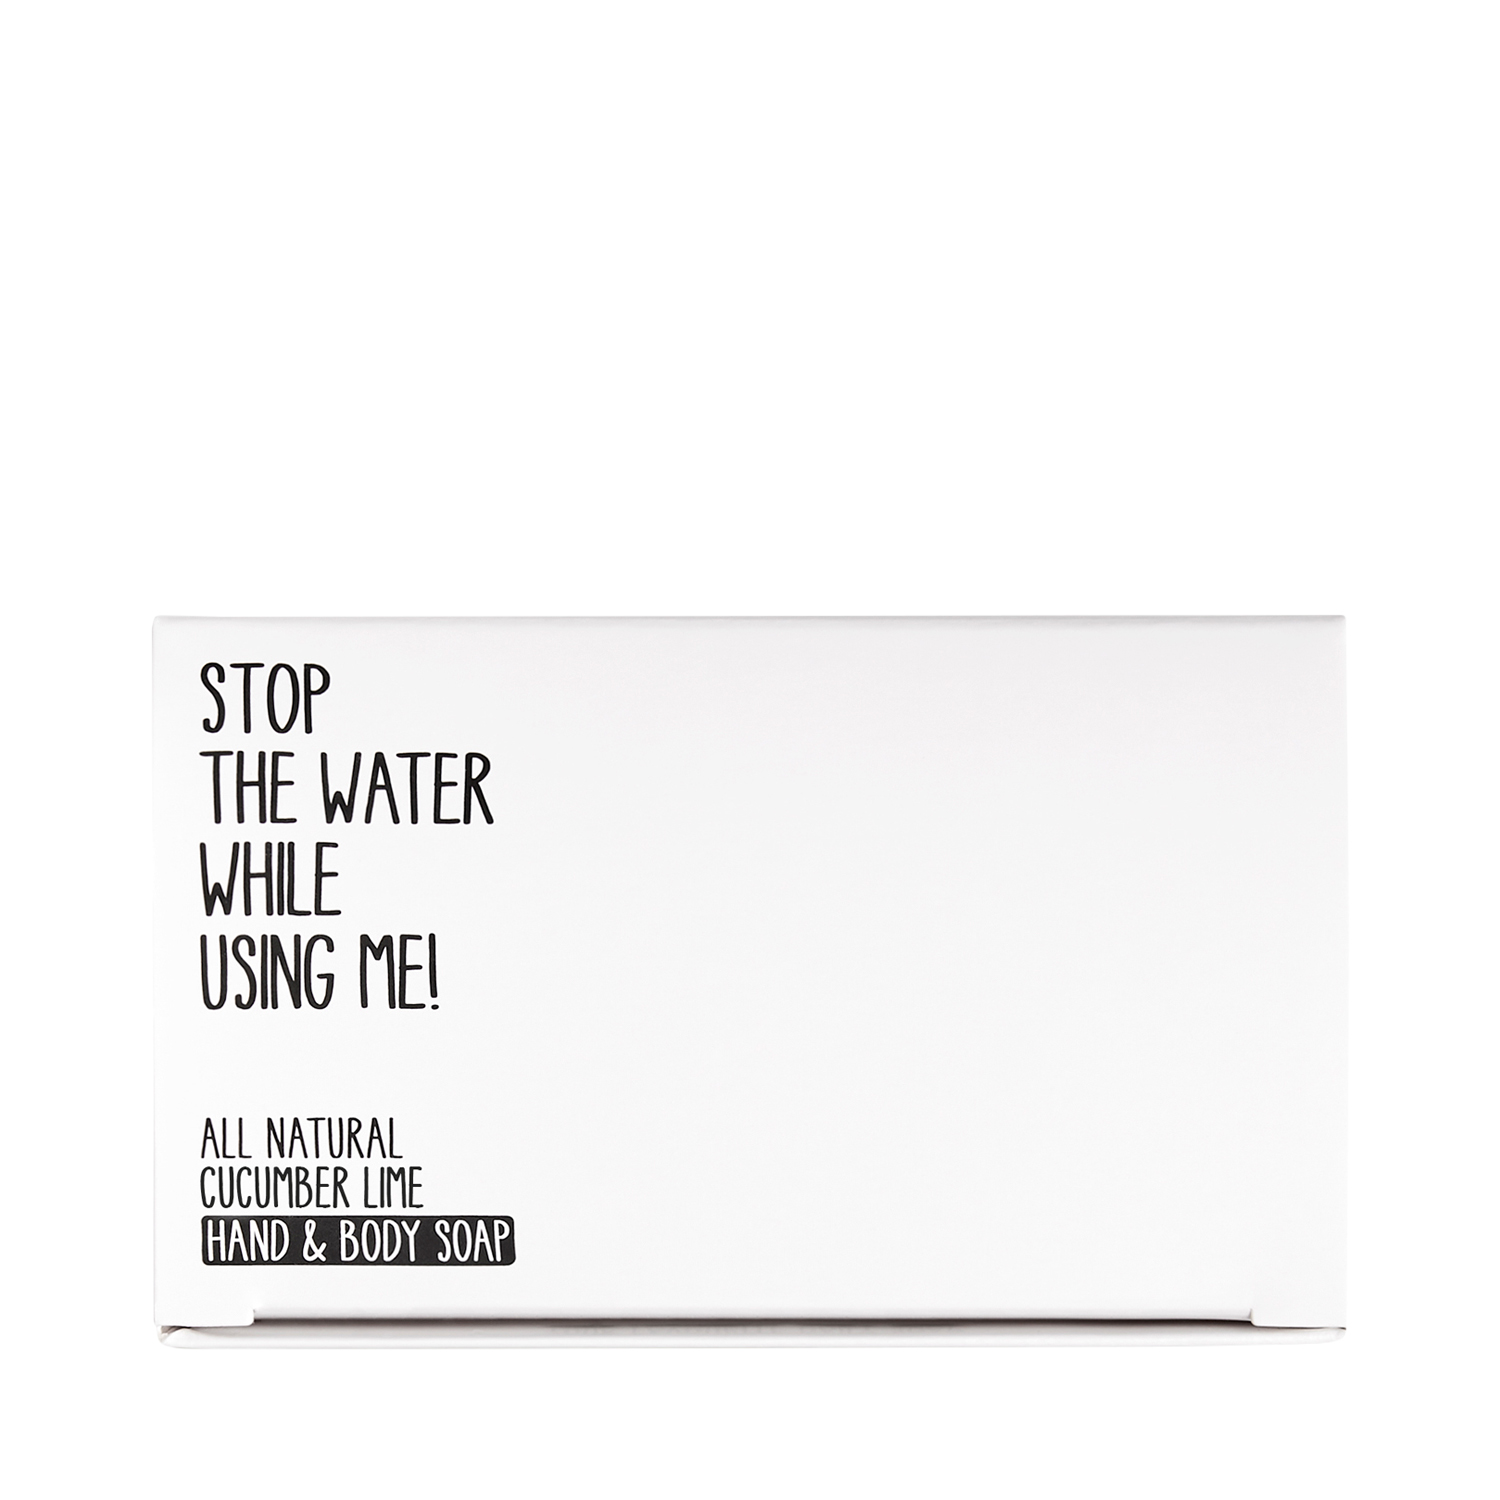 Stop The Water While Using Me! - All Natural Cucumber Lime Bar Soap - Hand - & Körperseife